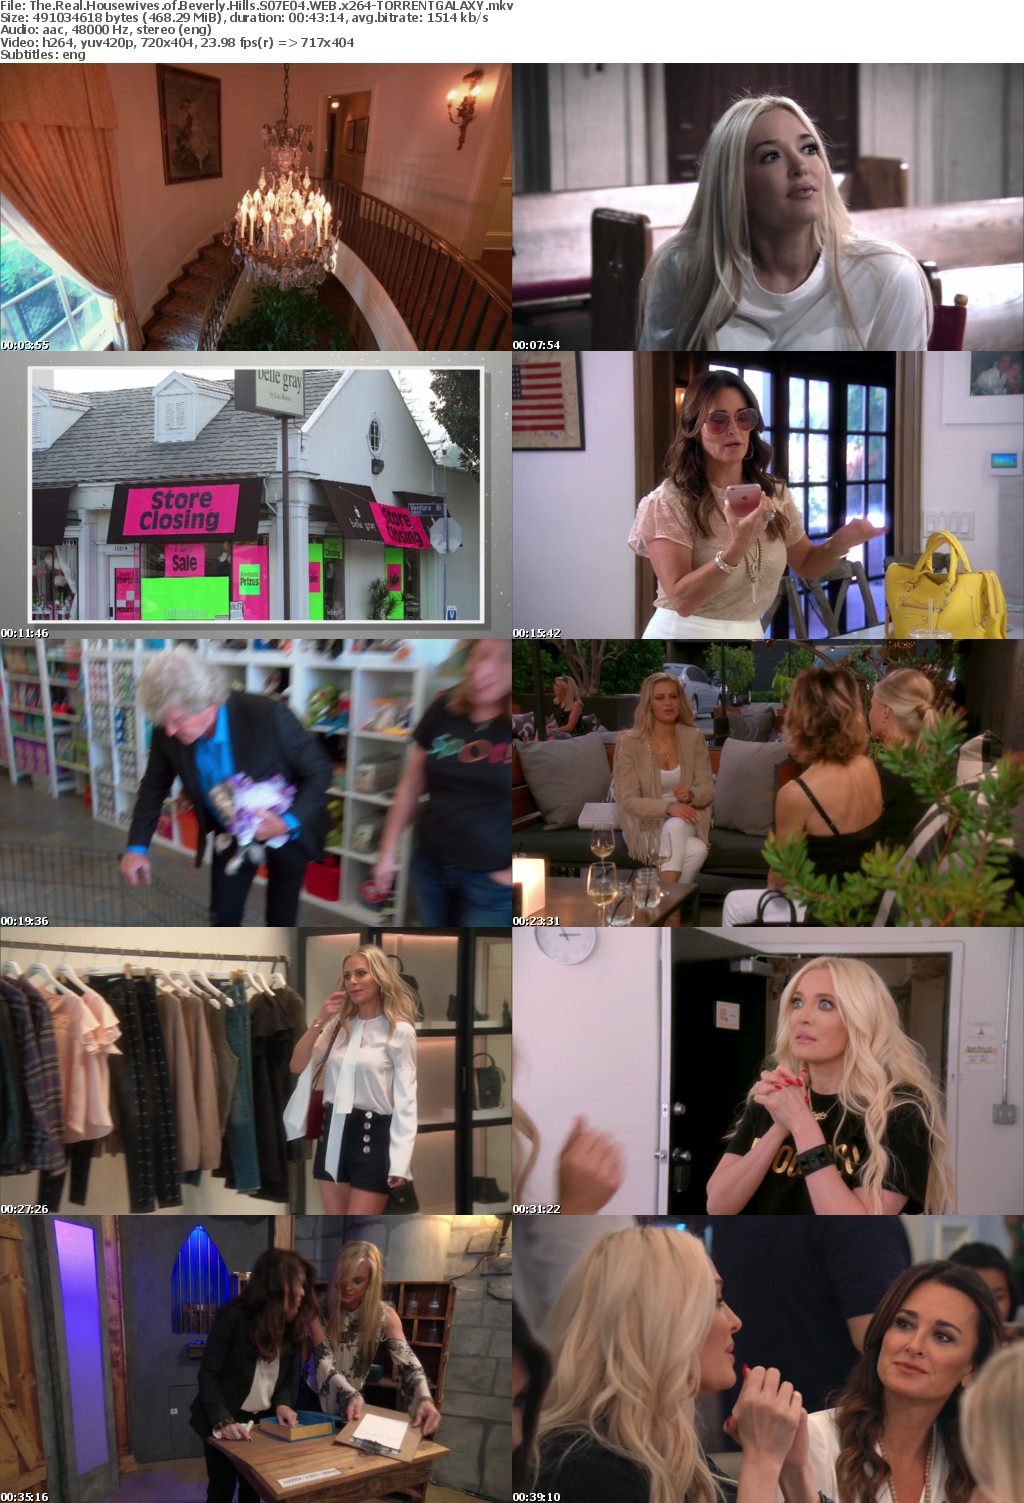 The Real Housewives of Beverly Hills S07E04 WEB x264-GALAXY